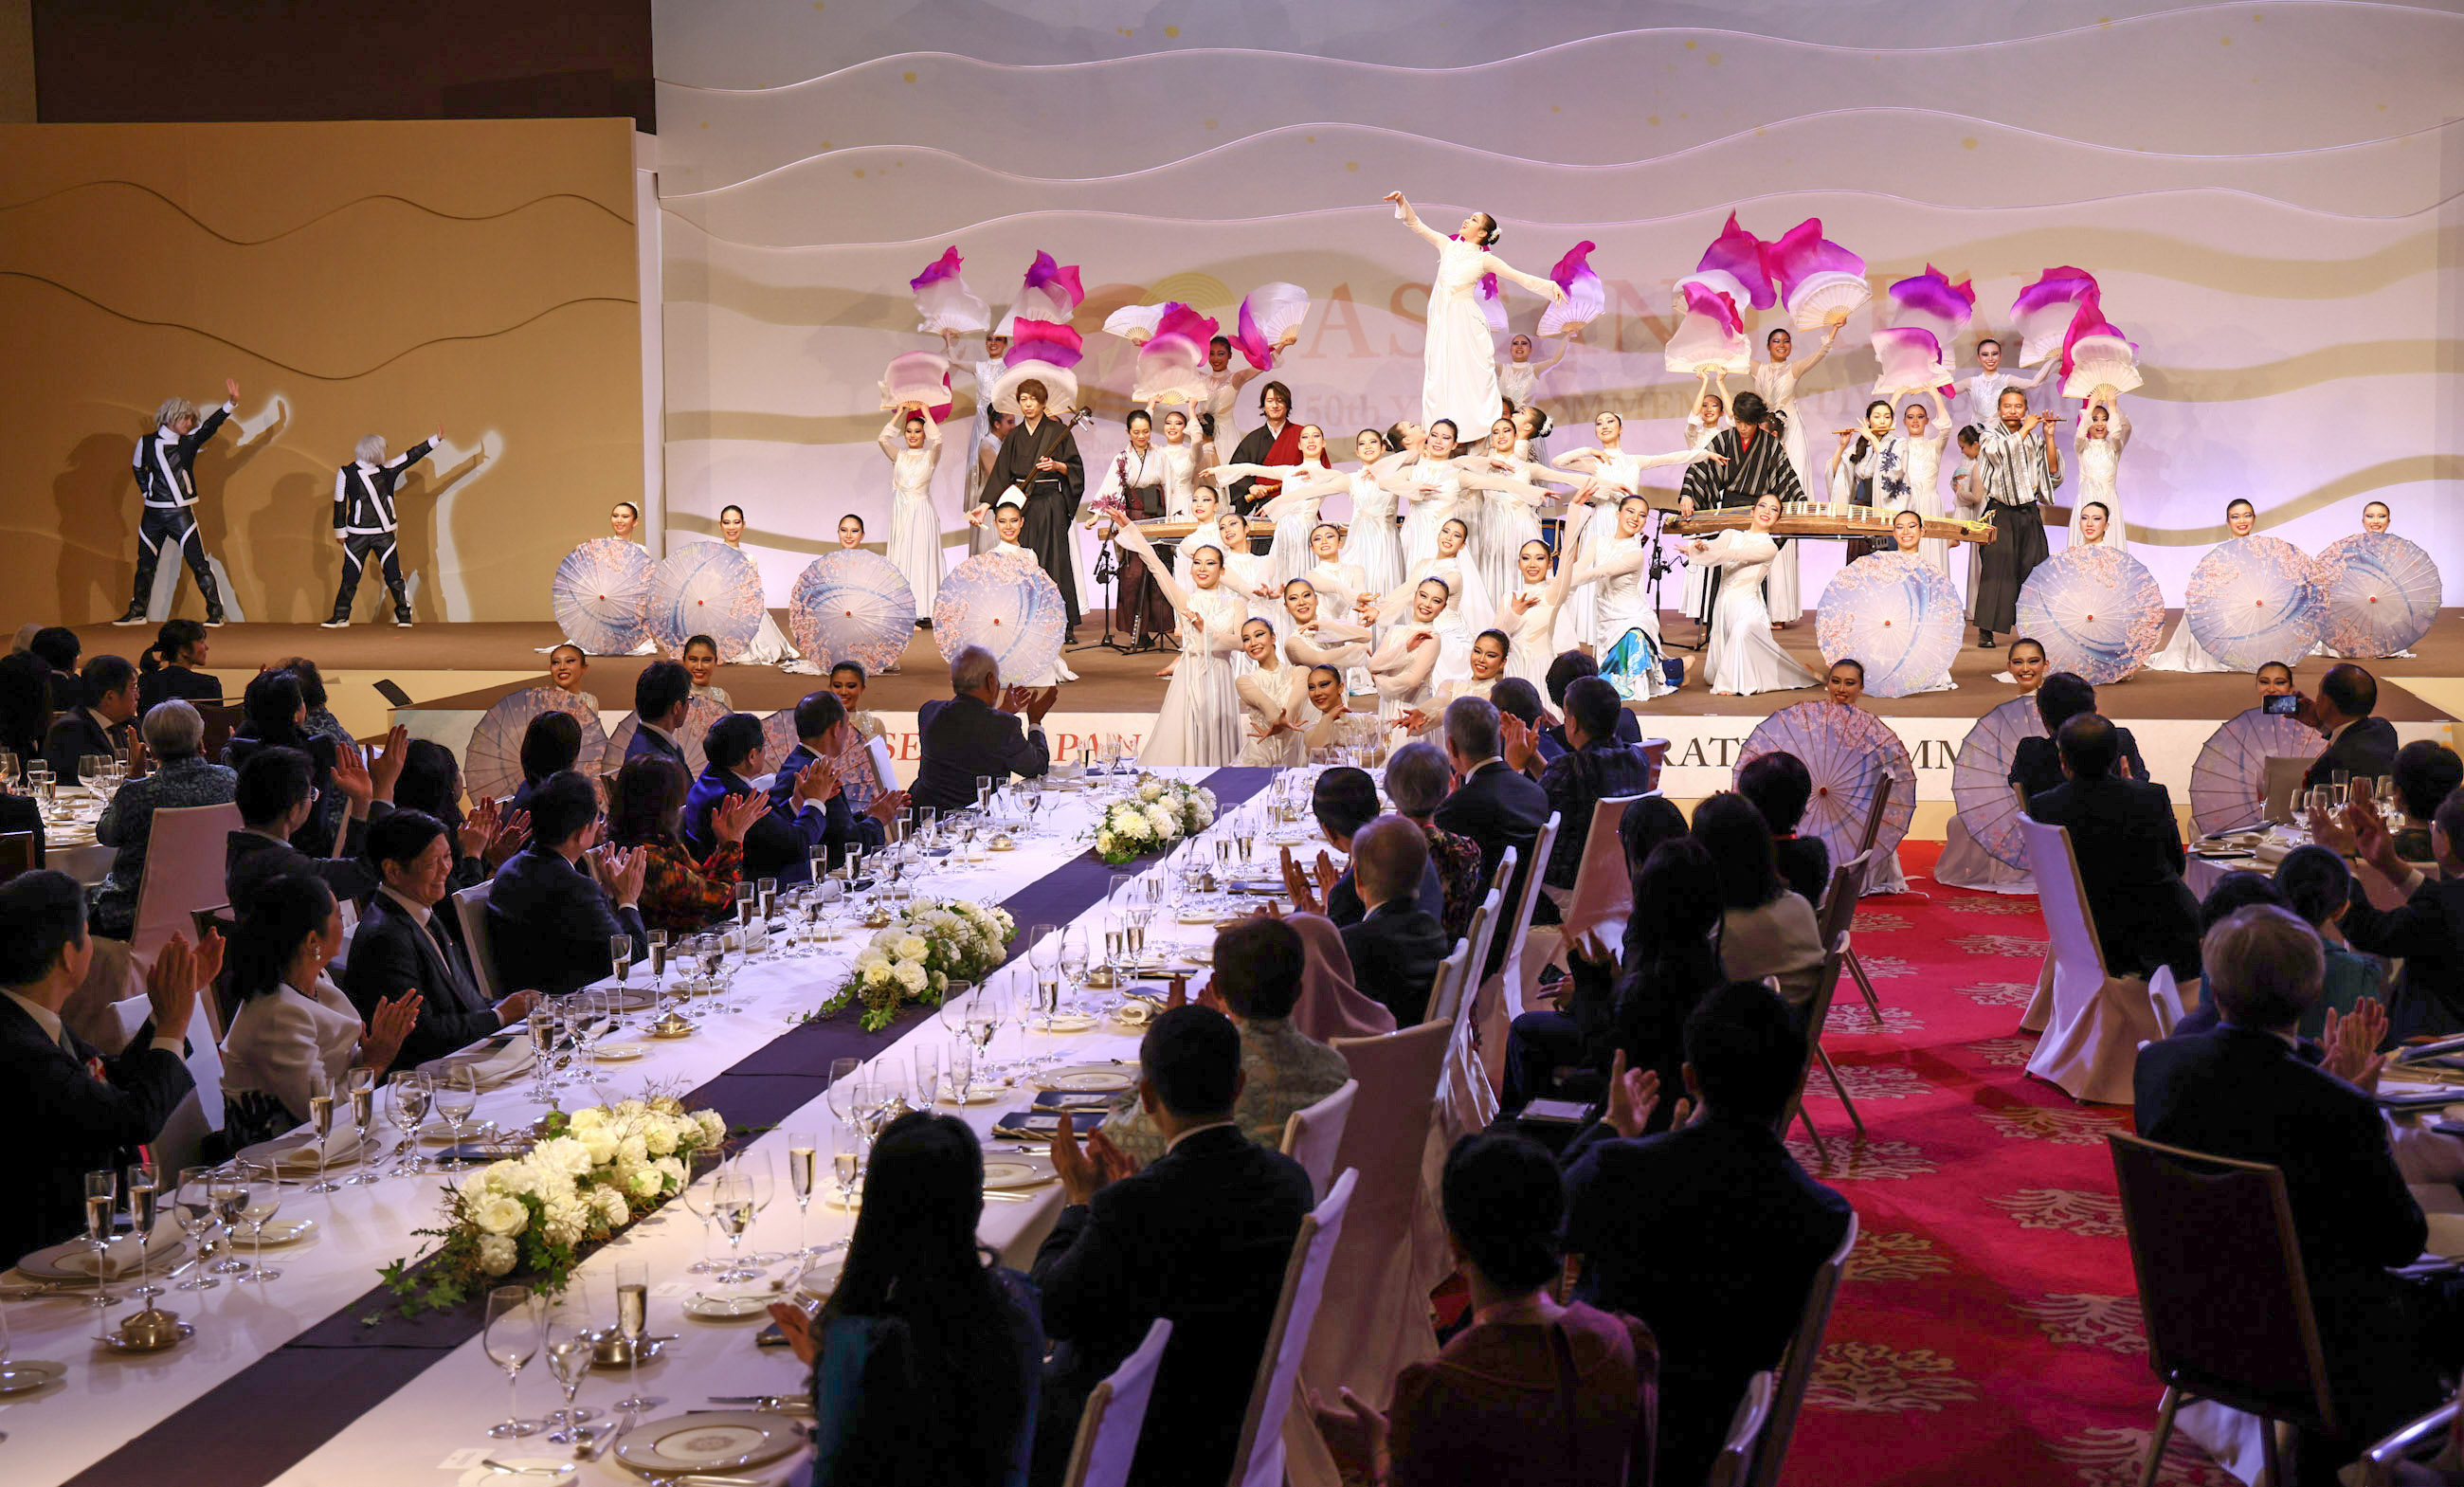 Prime Minister Kishida watching a performance at the gala dinner